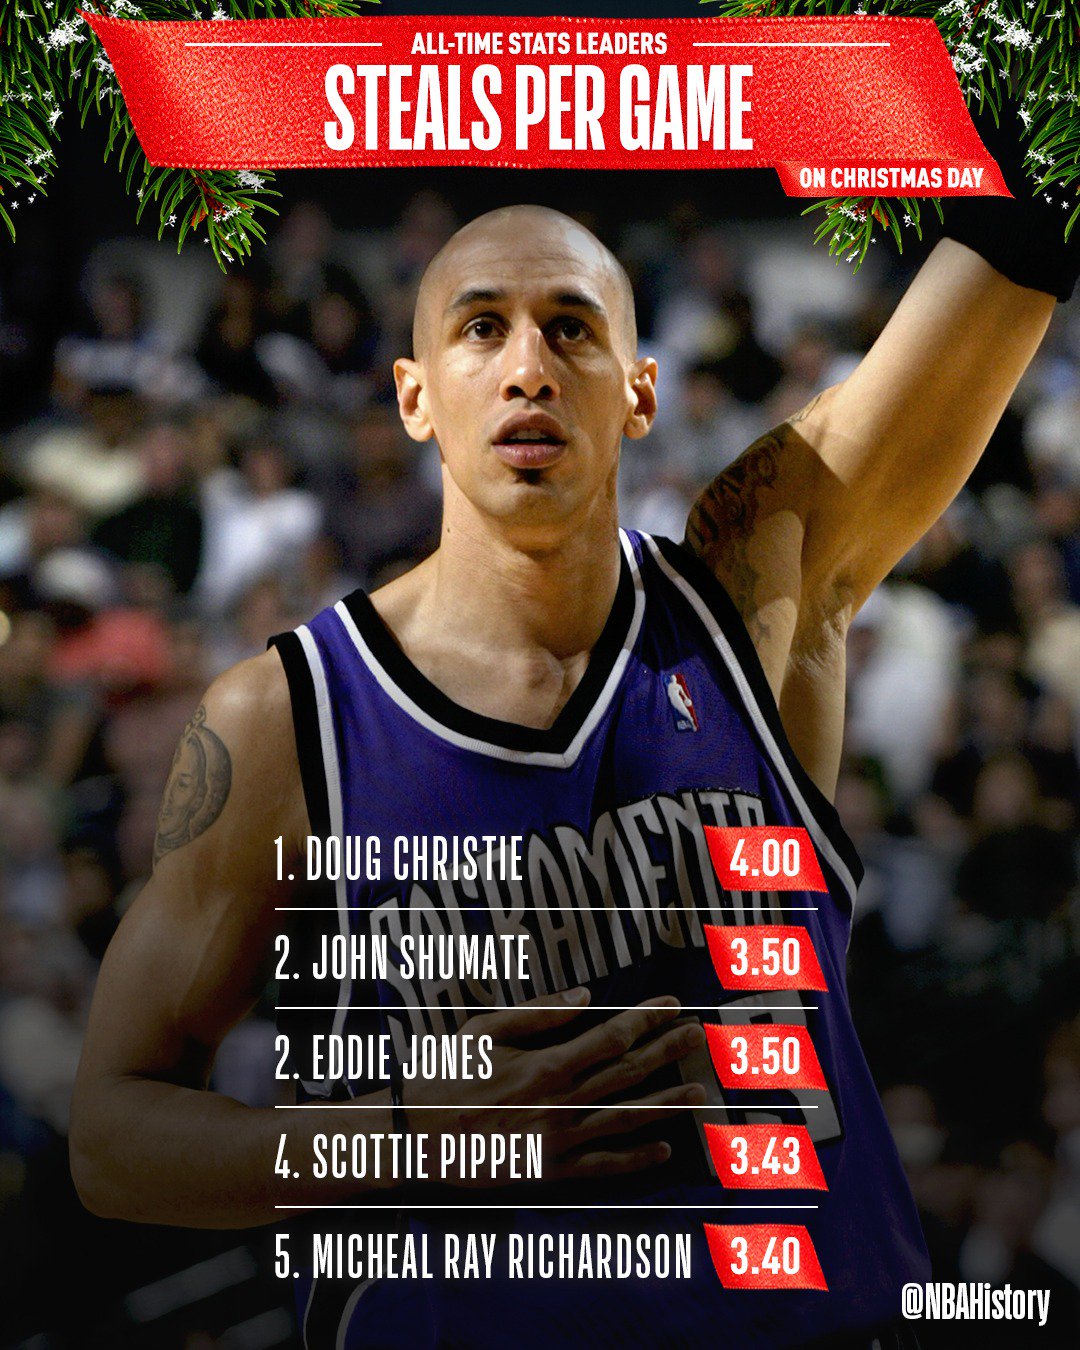 Speed ​​up Glossary Junior NBA History on Twitter: "The all-time REBOUNDS PER GAME leaders in #NBAXmas  history! https://t.co/mDD1cJj3gZ" / Twitter